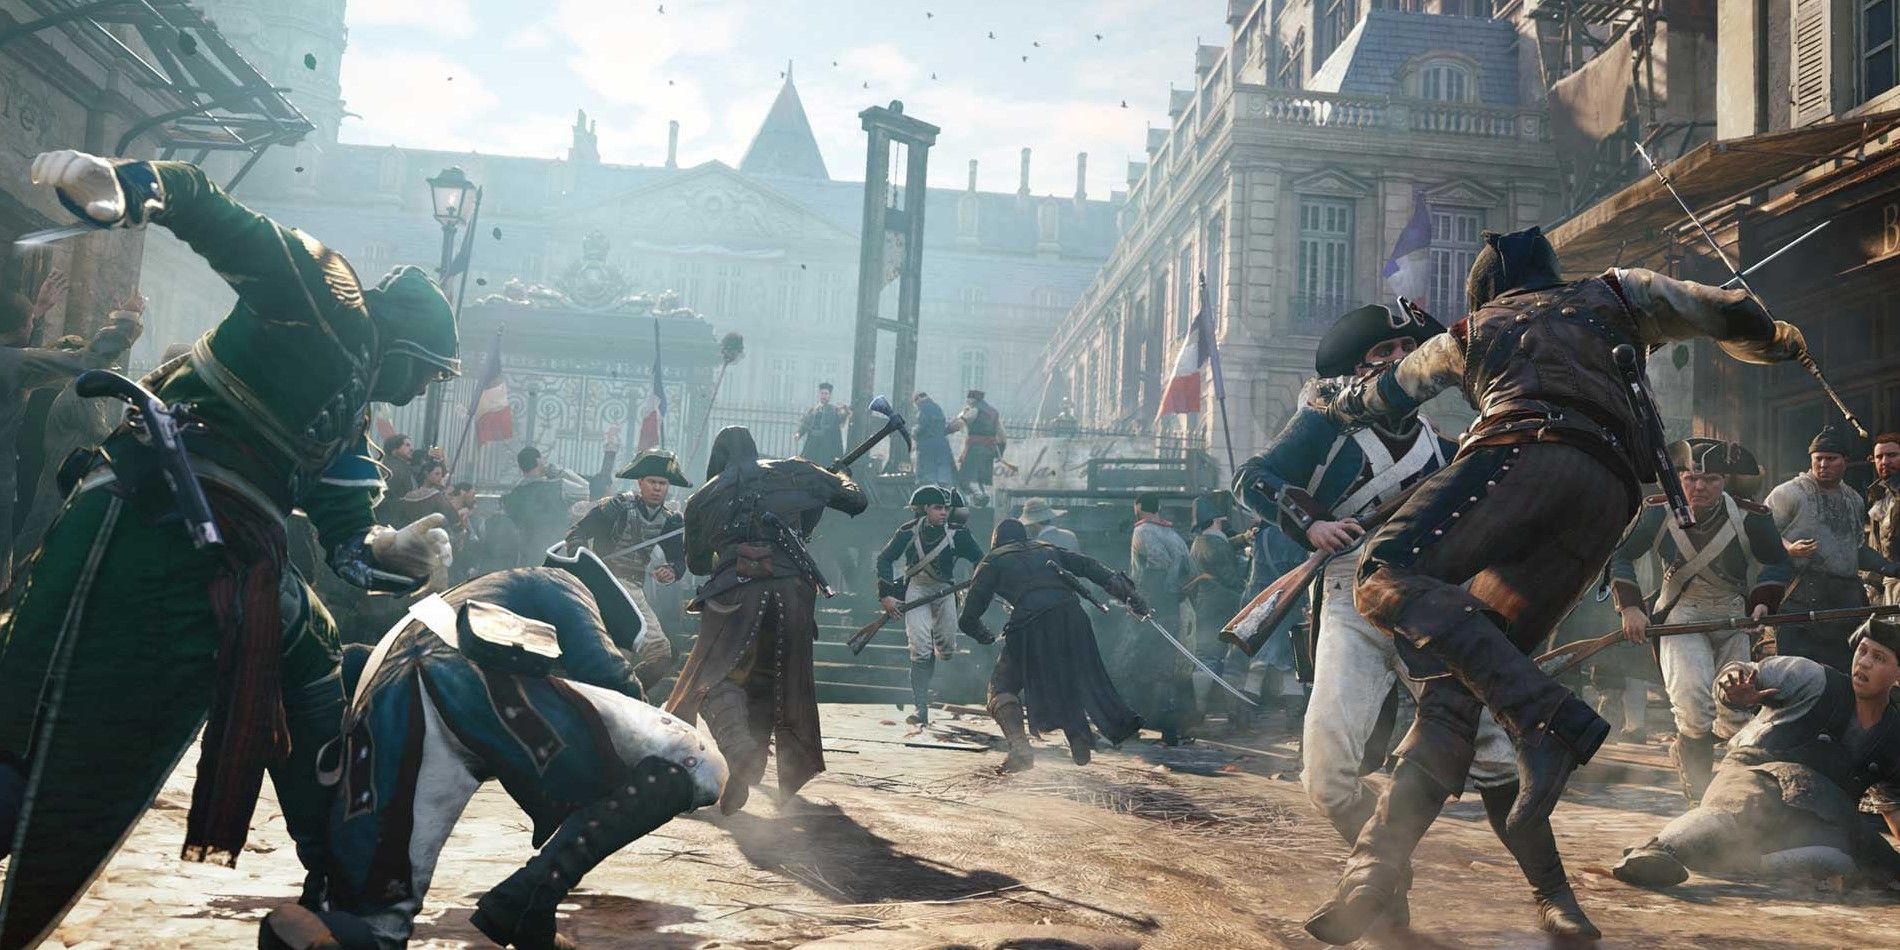 Arno and other Assassins in Assassin's Creed Unity fighting French soldiers in a square in Paris.